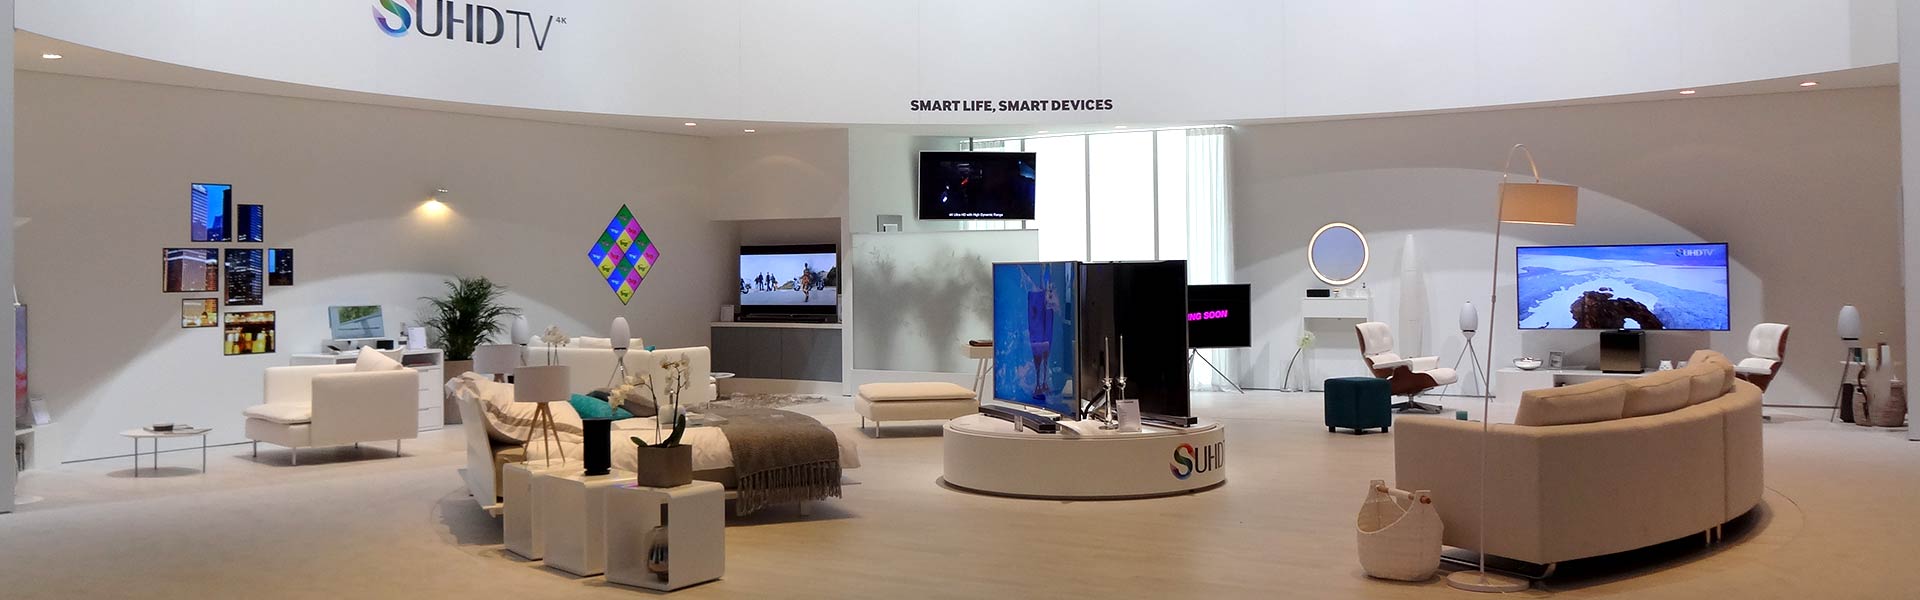 Samsung IFA Messe 2015 Next is Now Smart Life Smart Devices Home Lifestyle Entertainment Living